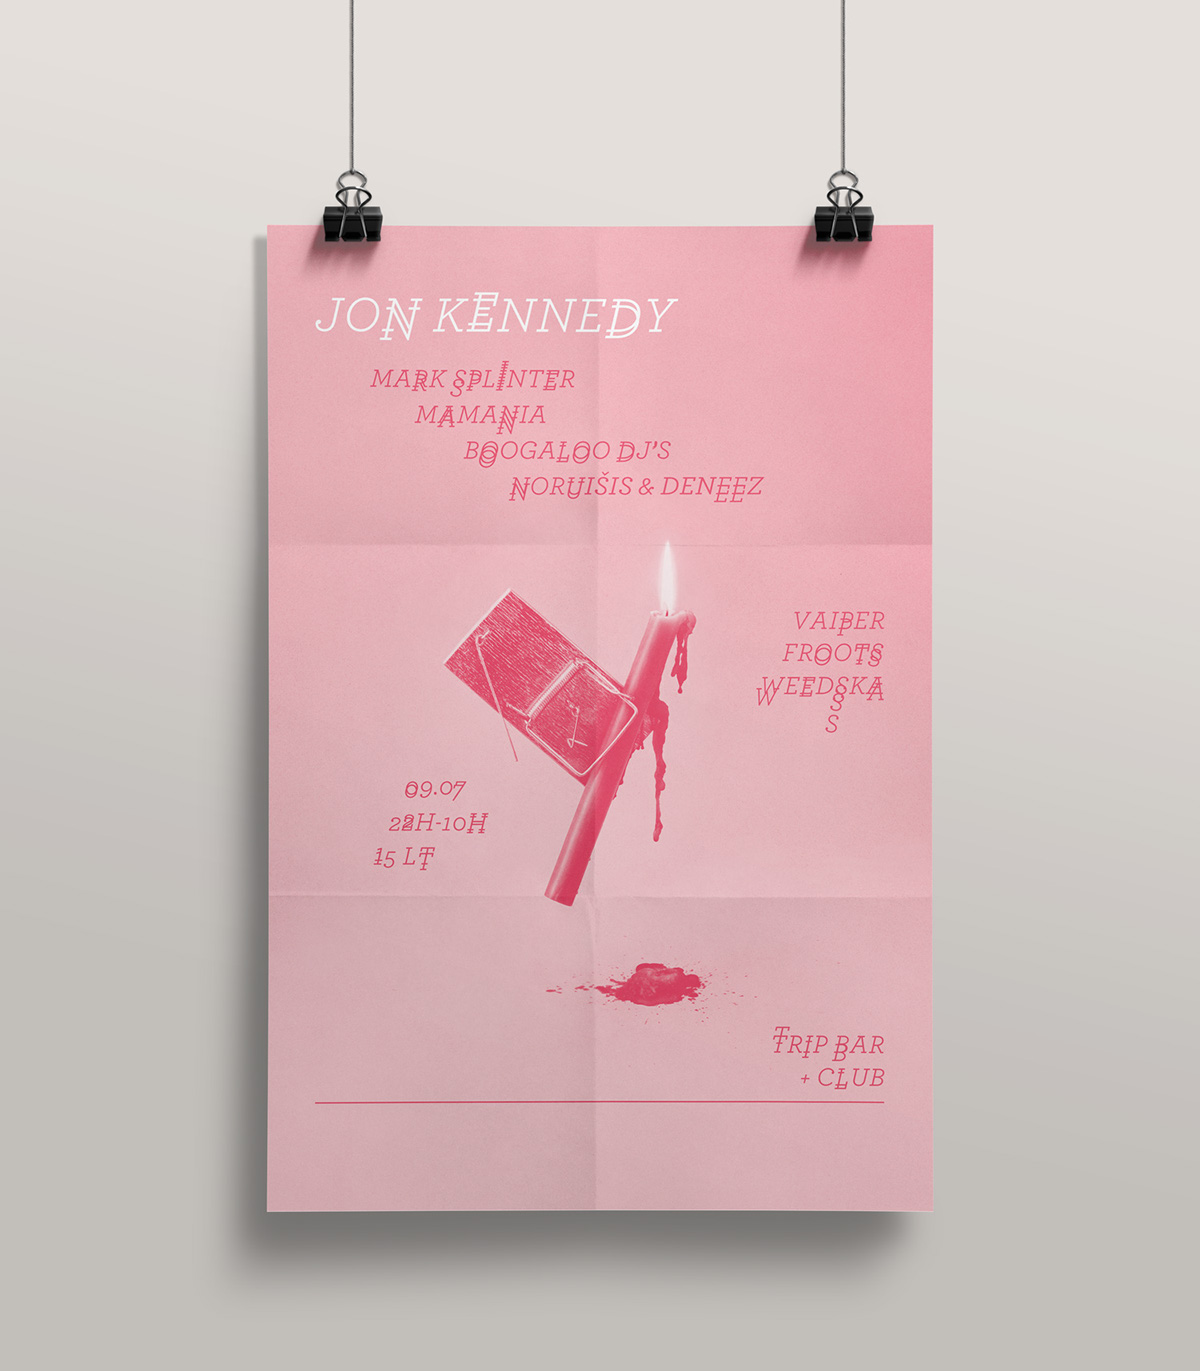 print flyer poster trip bar Jon Kennedy candle trap graphic craft